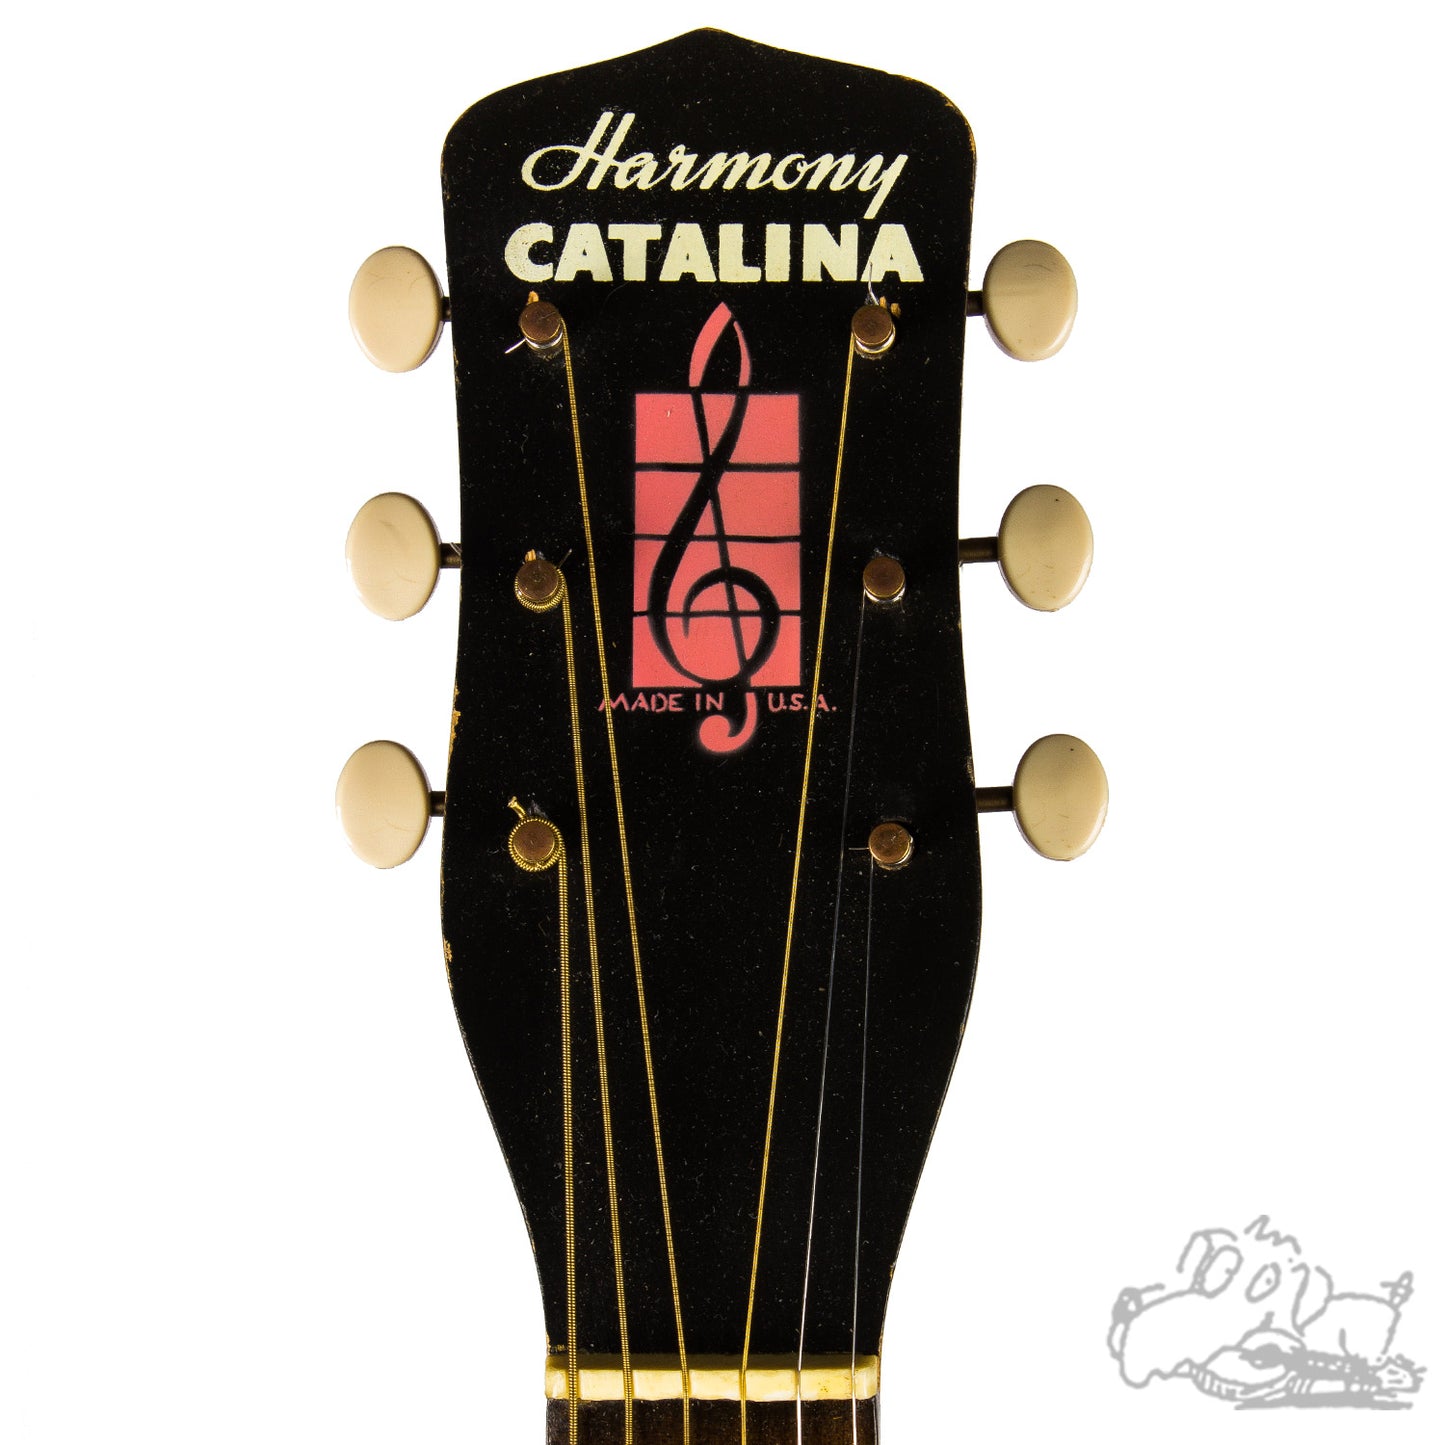 1950's Harmony Catalina H1220 - Charcoal Grey and Pink - Archtop Acoustic Guitar